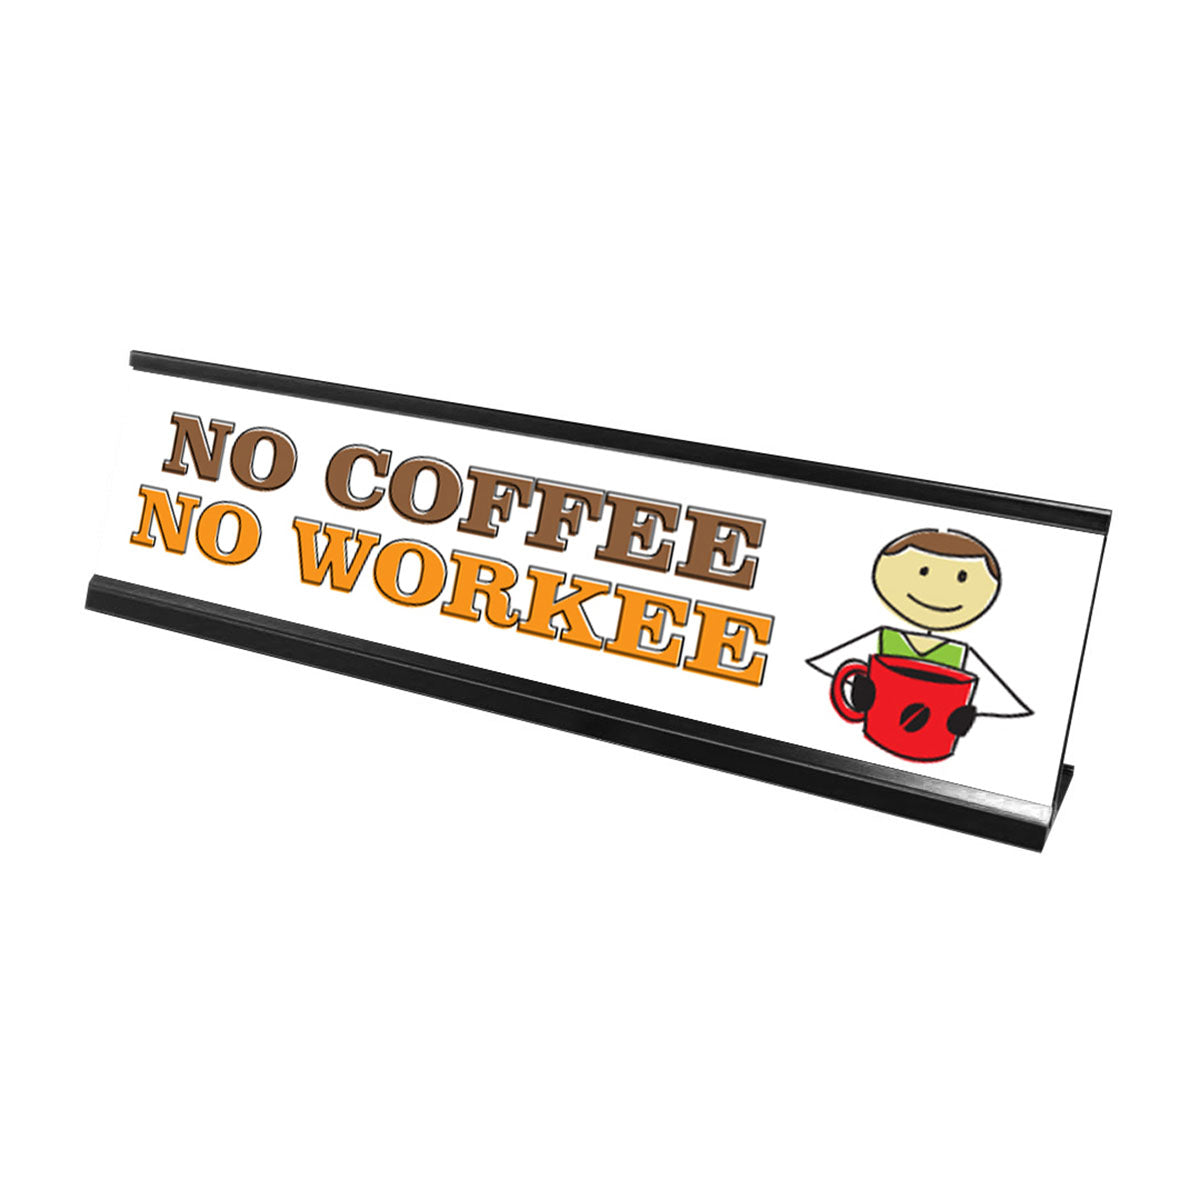 No Coffee No Workee Stick People Desk Sign, Novelty Nameplate (2 x 8")